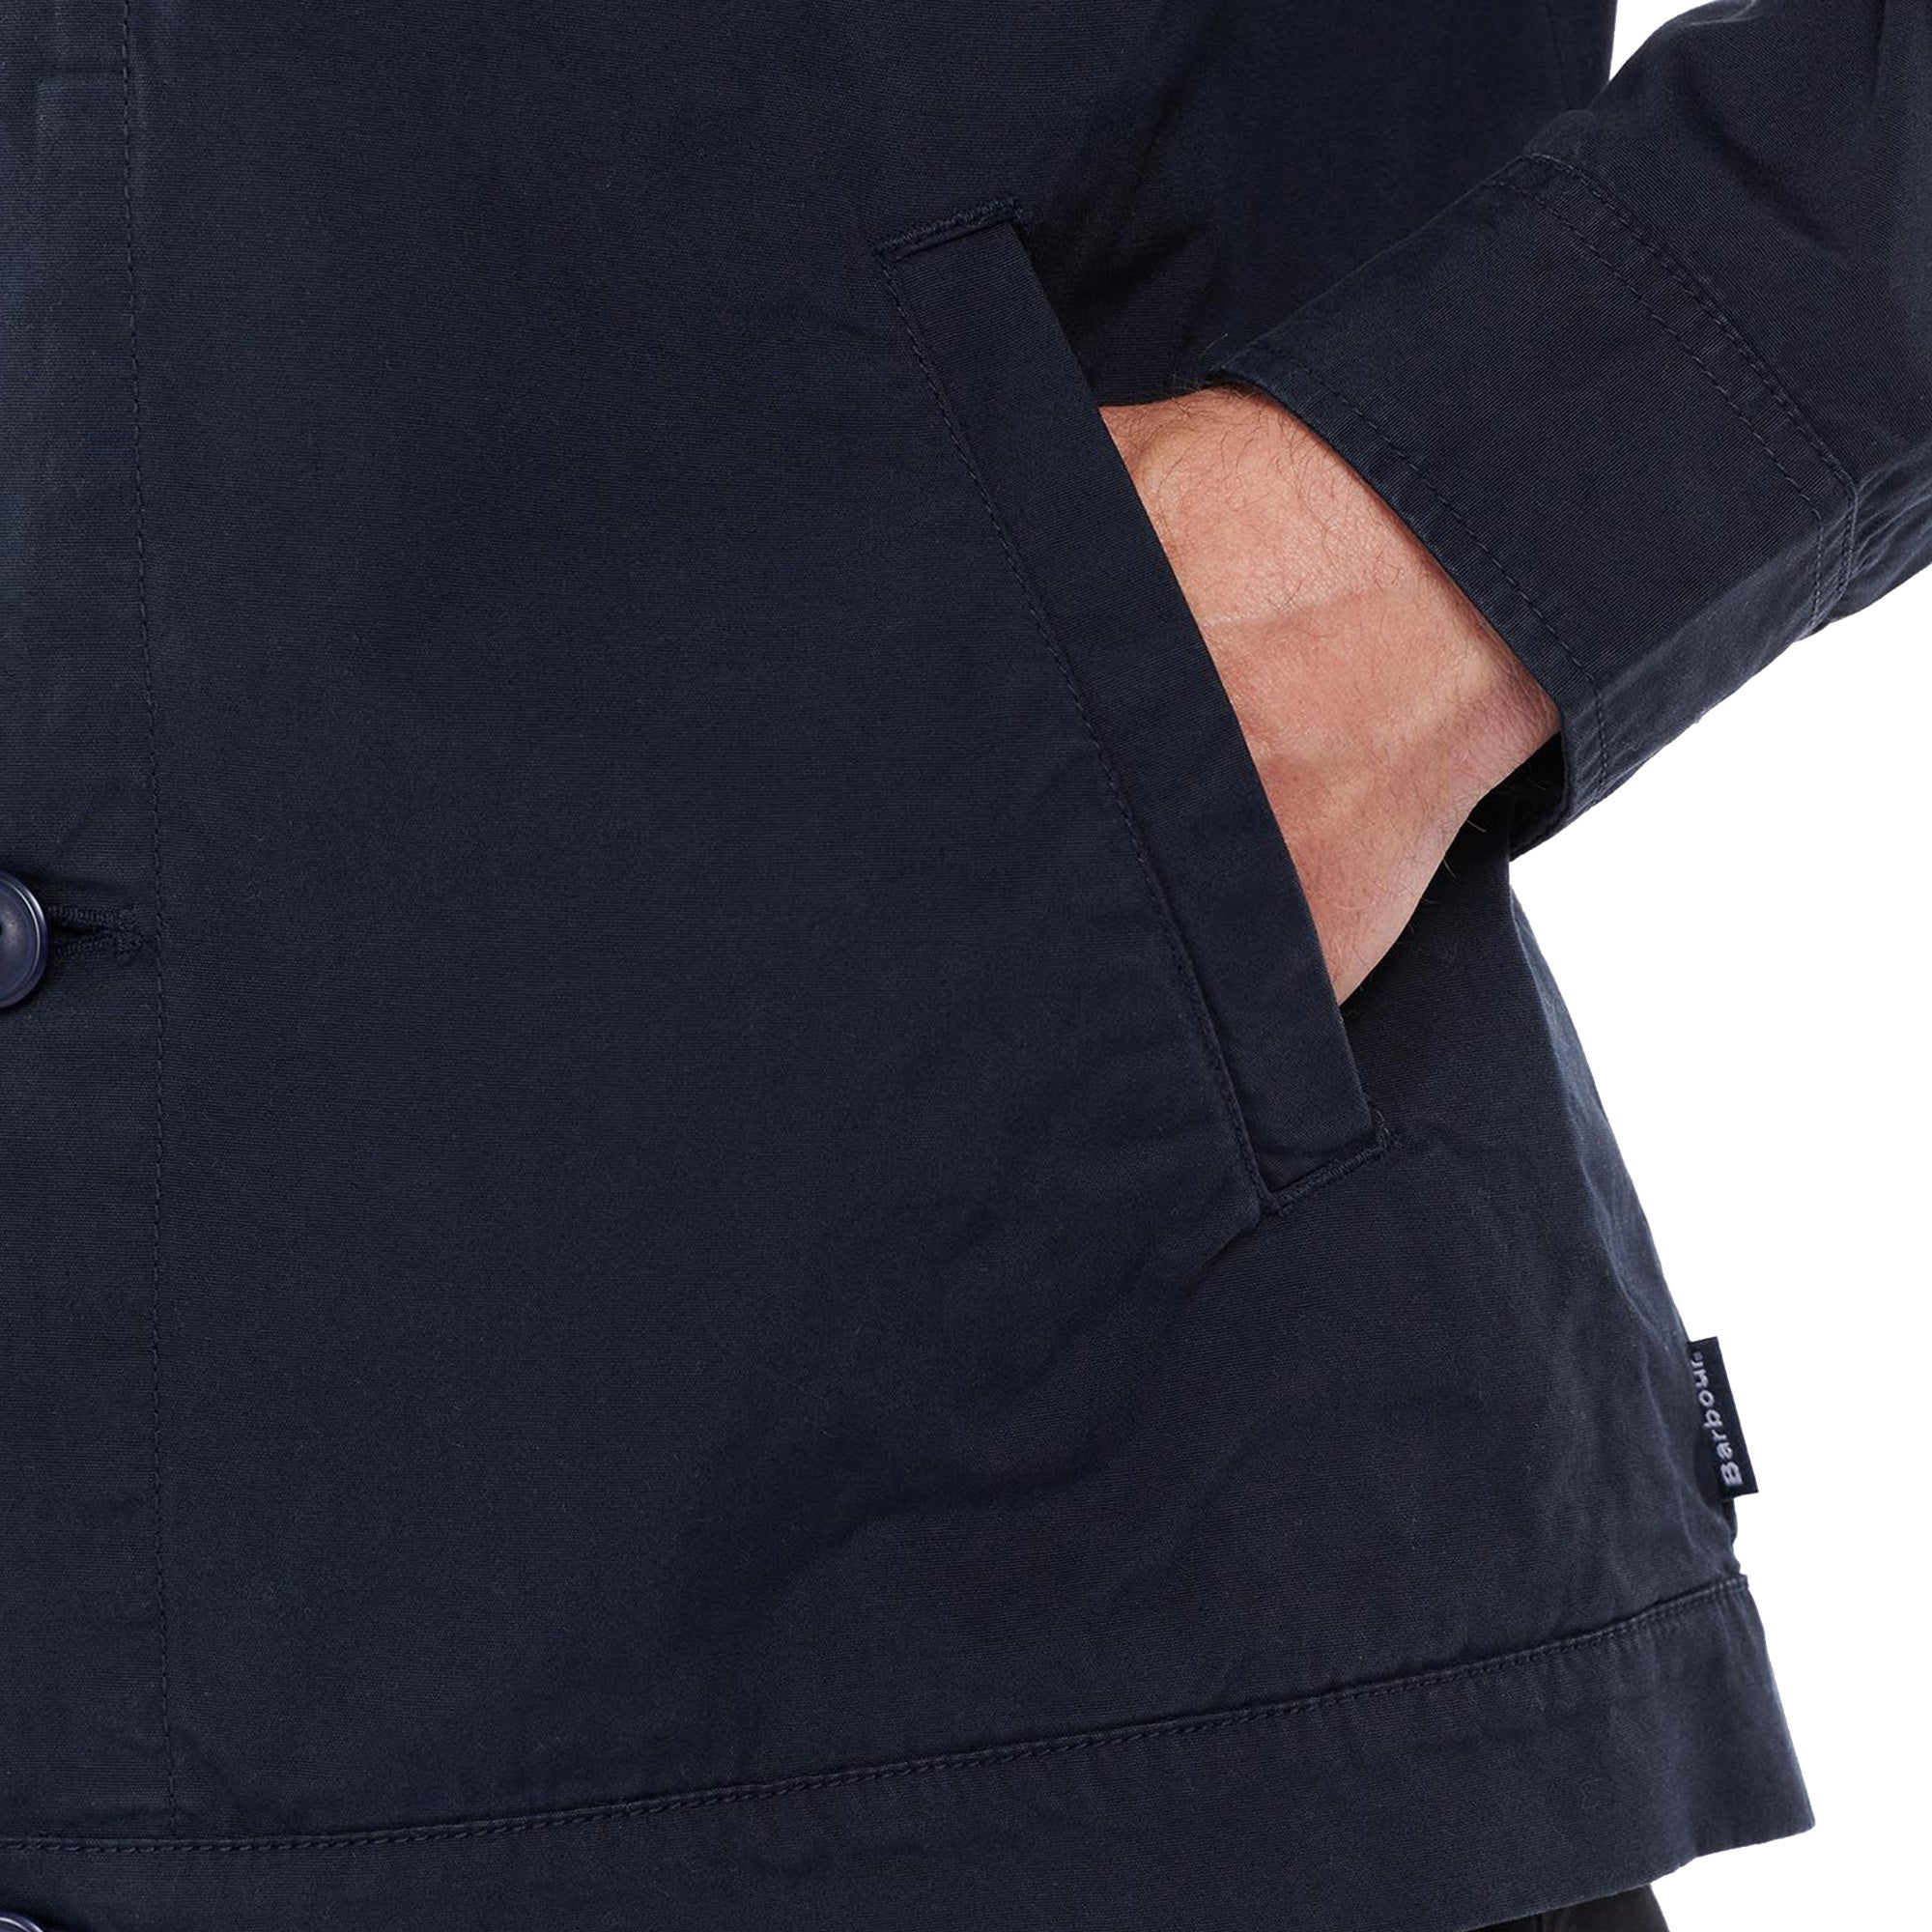 Barbour Connolly Overshirt - Navy